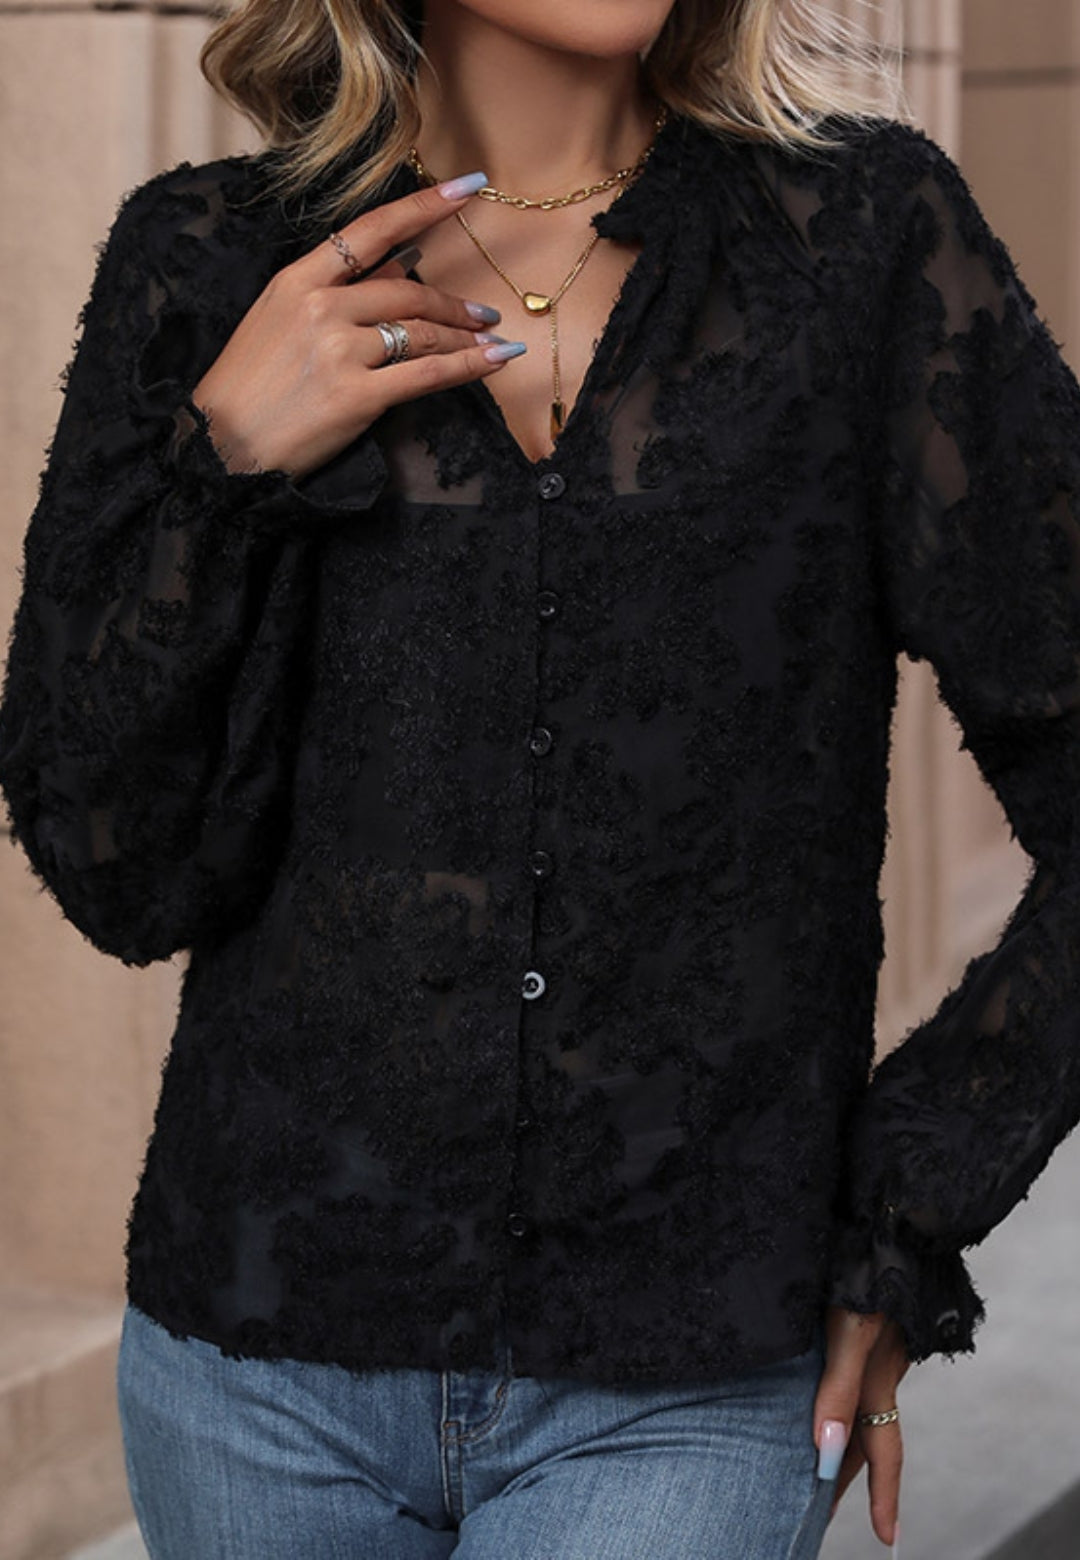 Black Collared Top - Sheer Lace Top - Long Sleeve Button-Up Top